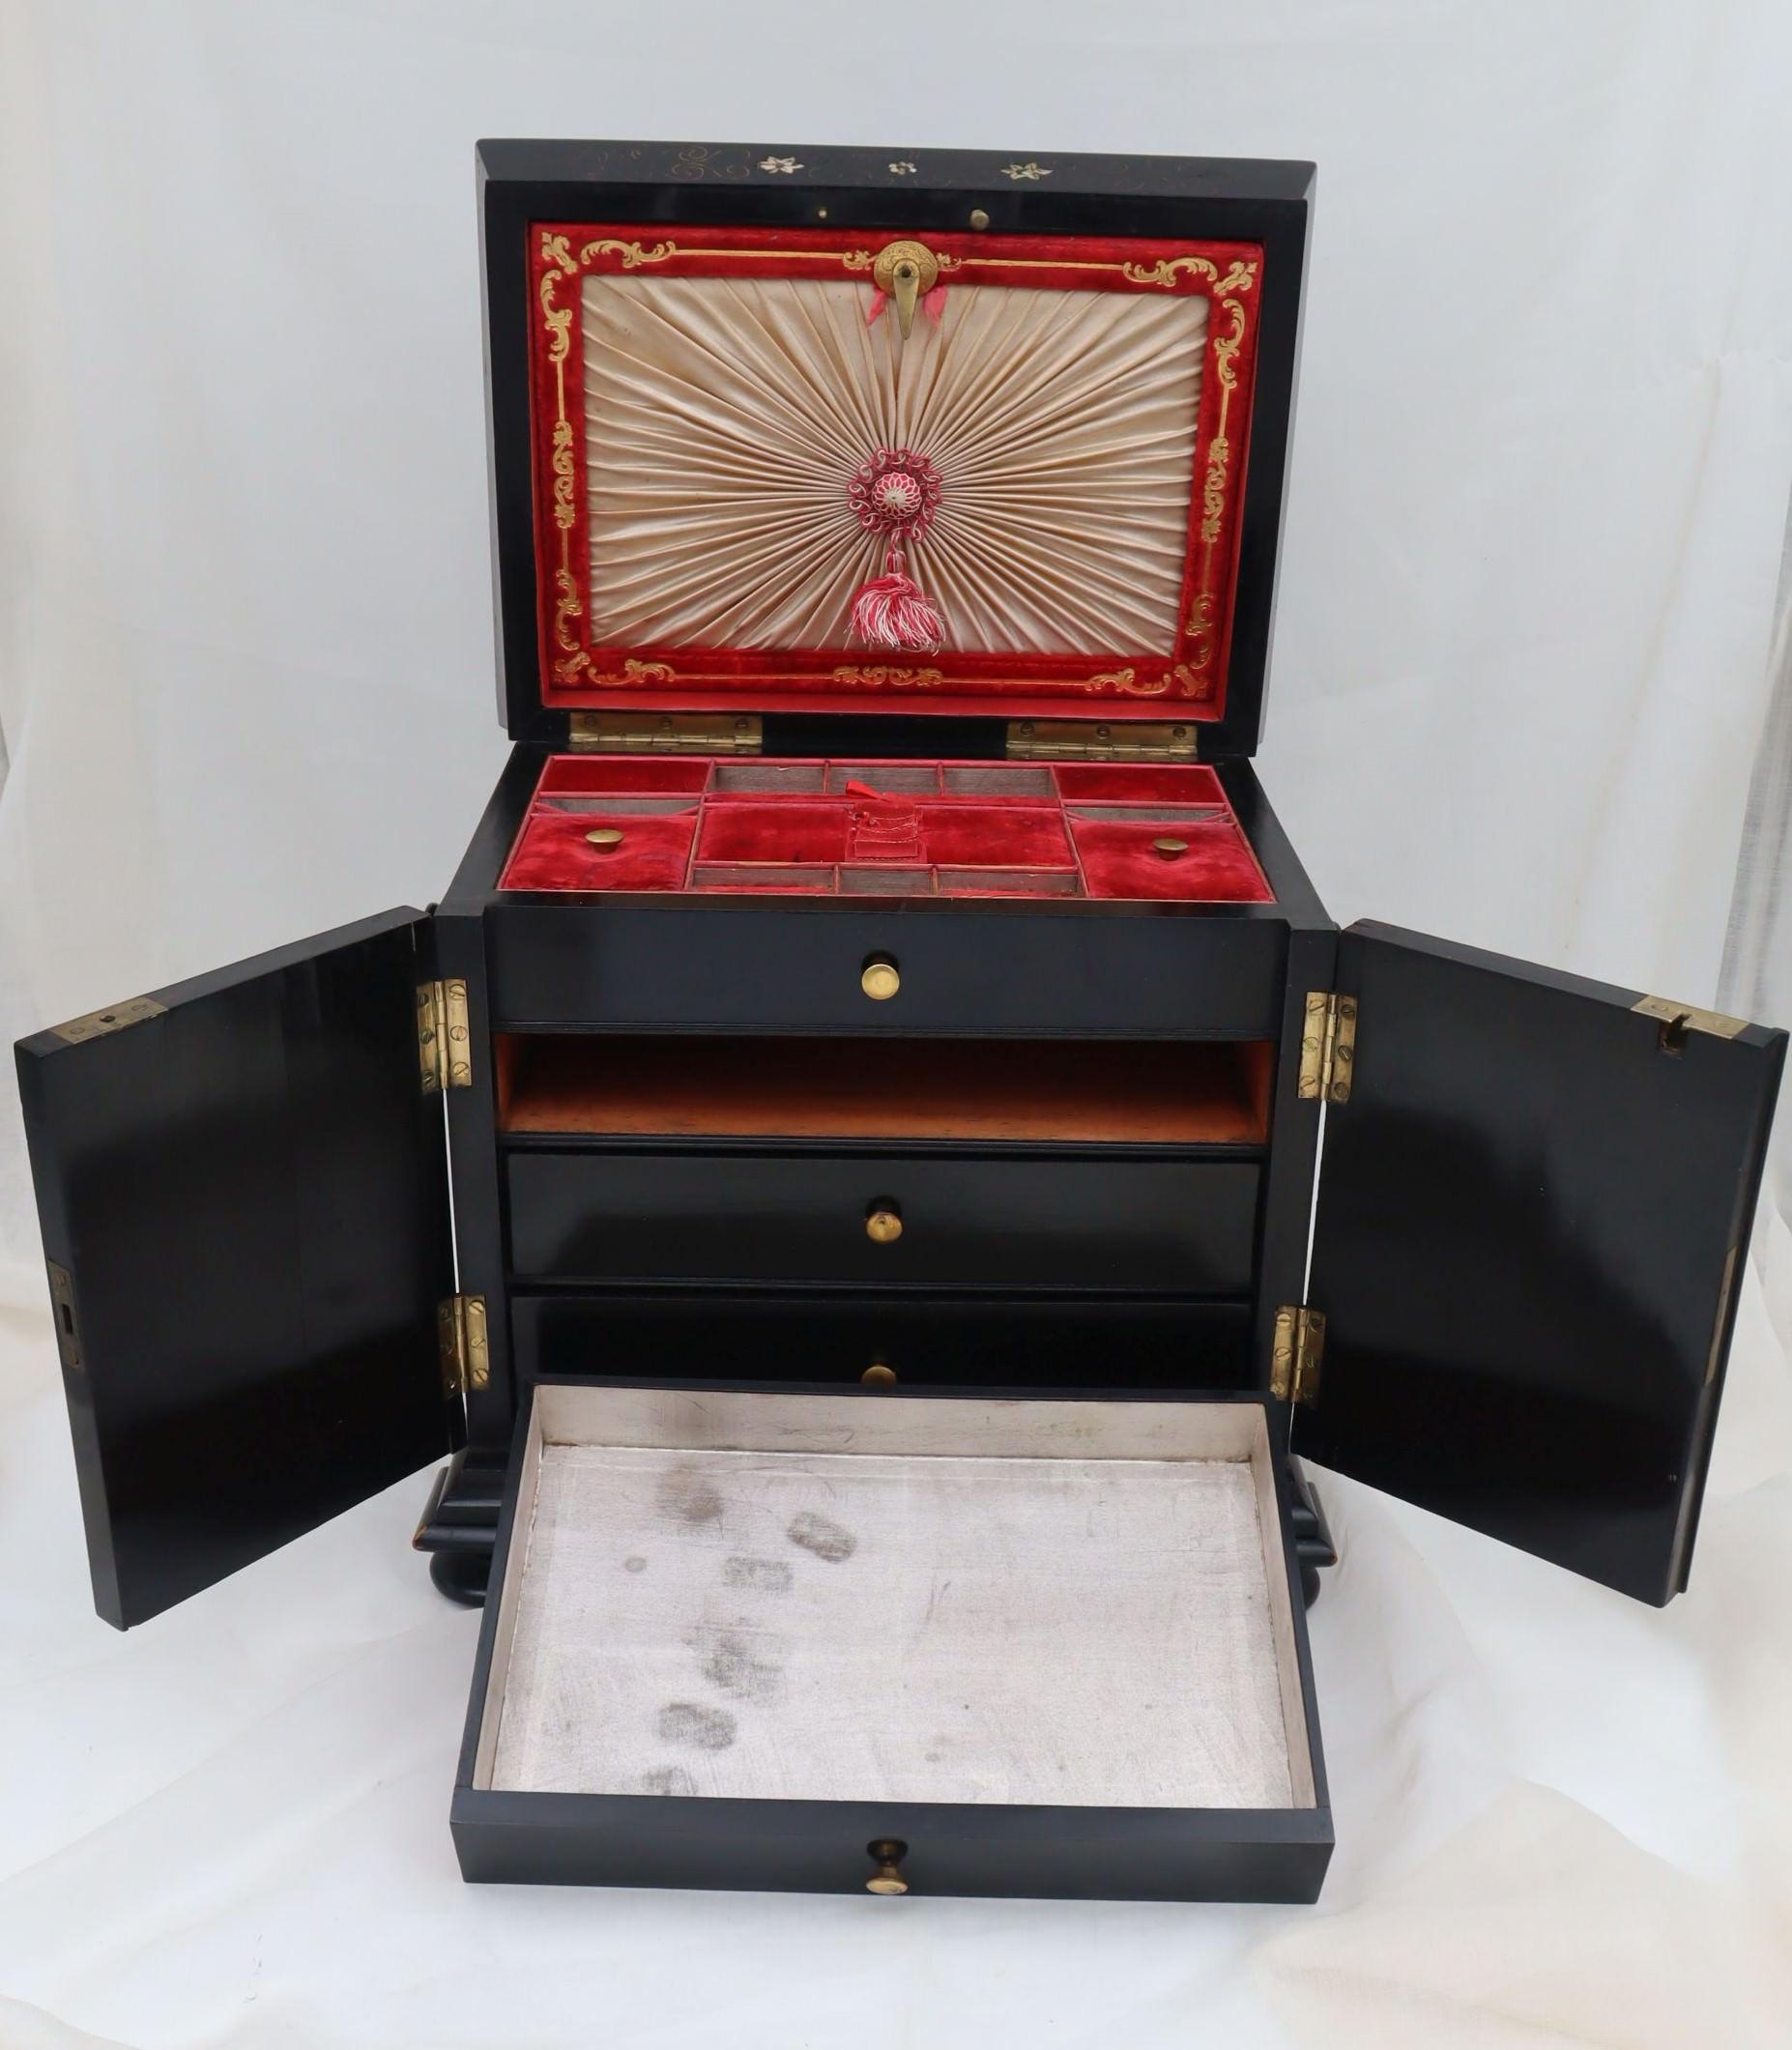 Inlay Ladies table compendium and jewelry box For Sale